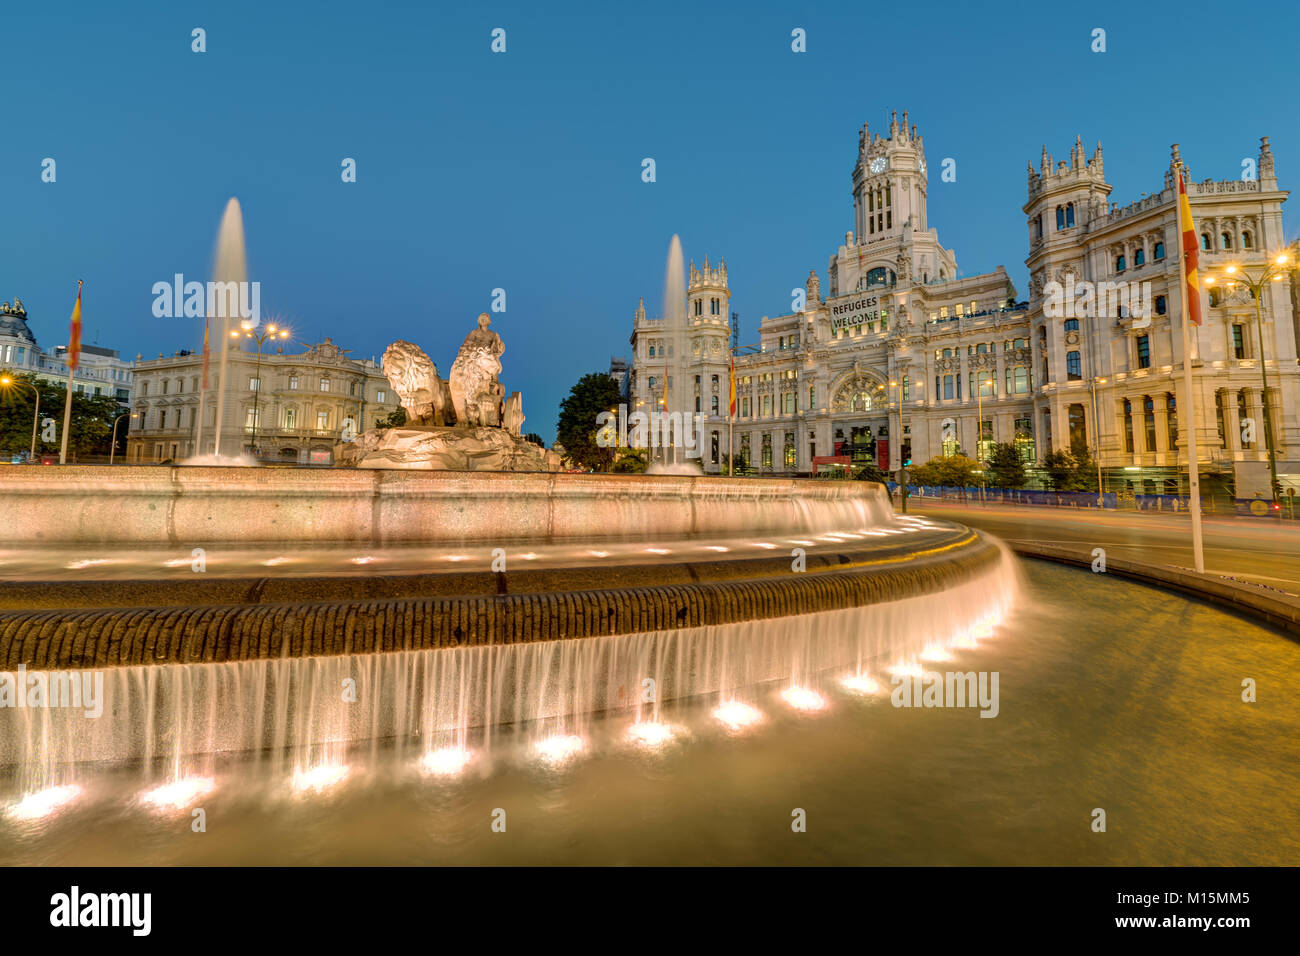 The Plaza de Cibeles with the Palace of Communication and the Cibeles Fountain in Madrid at night Stock Photo